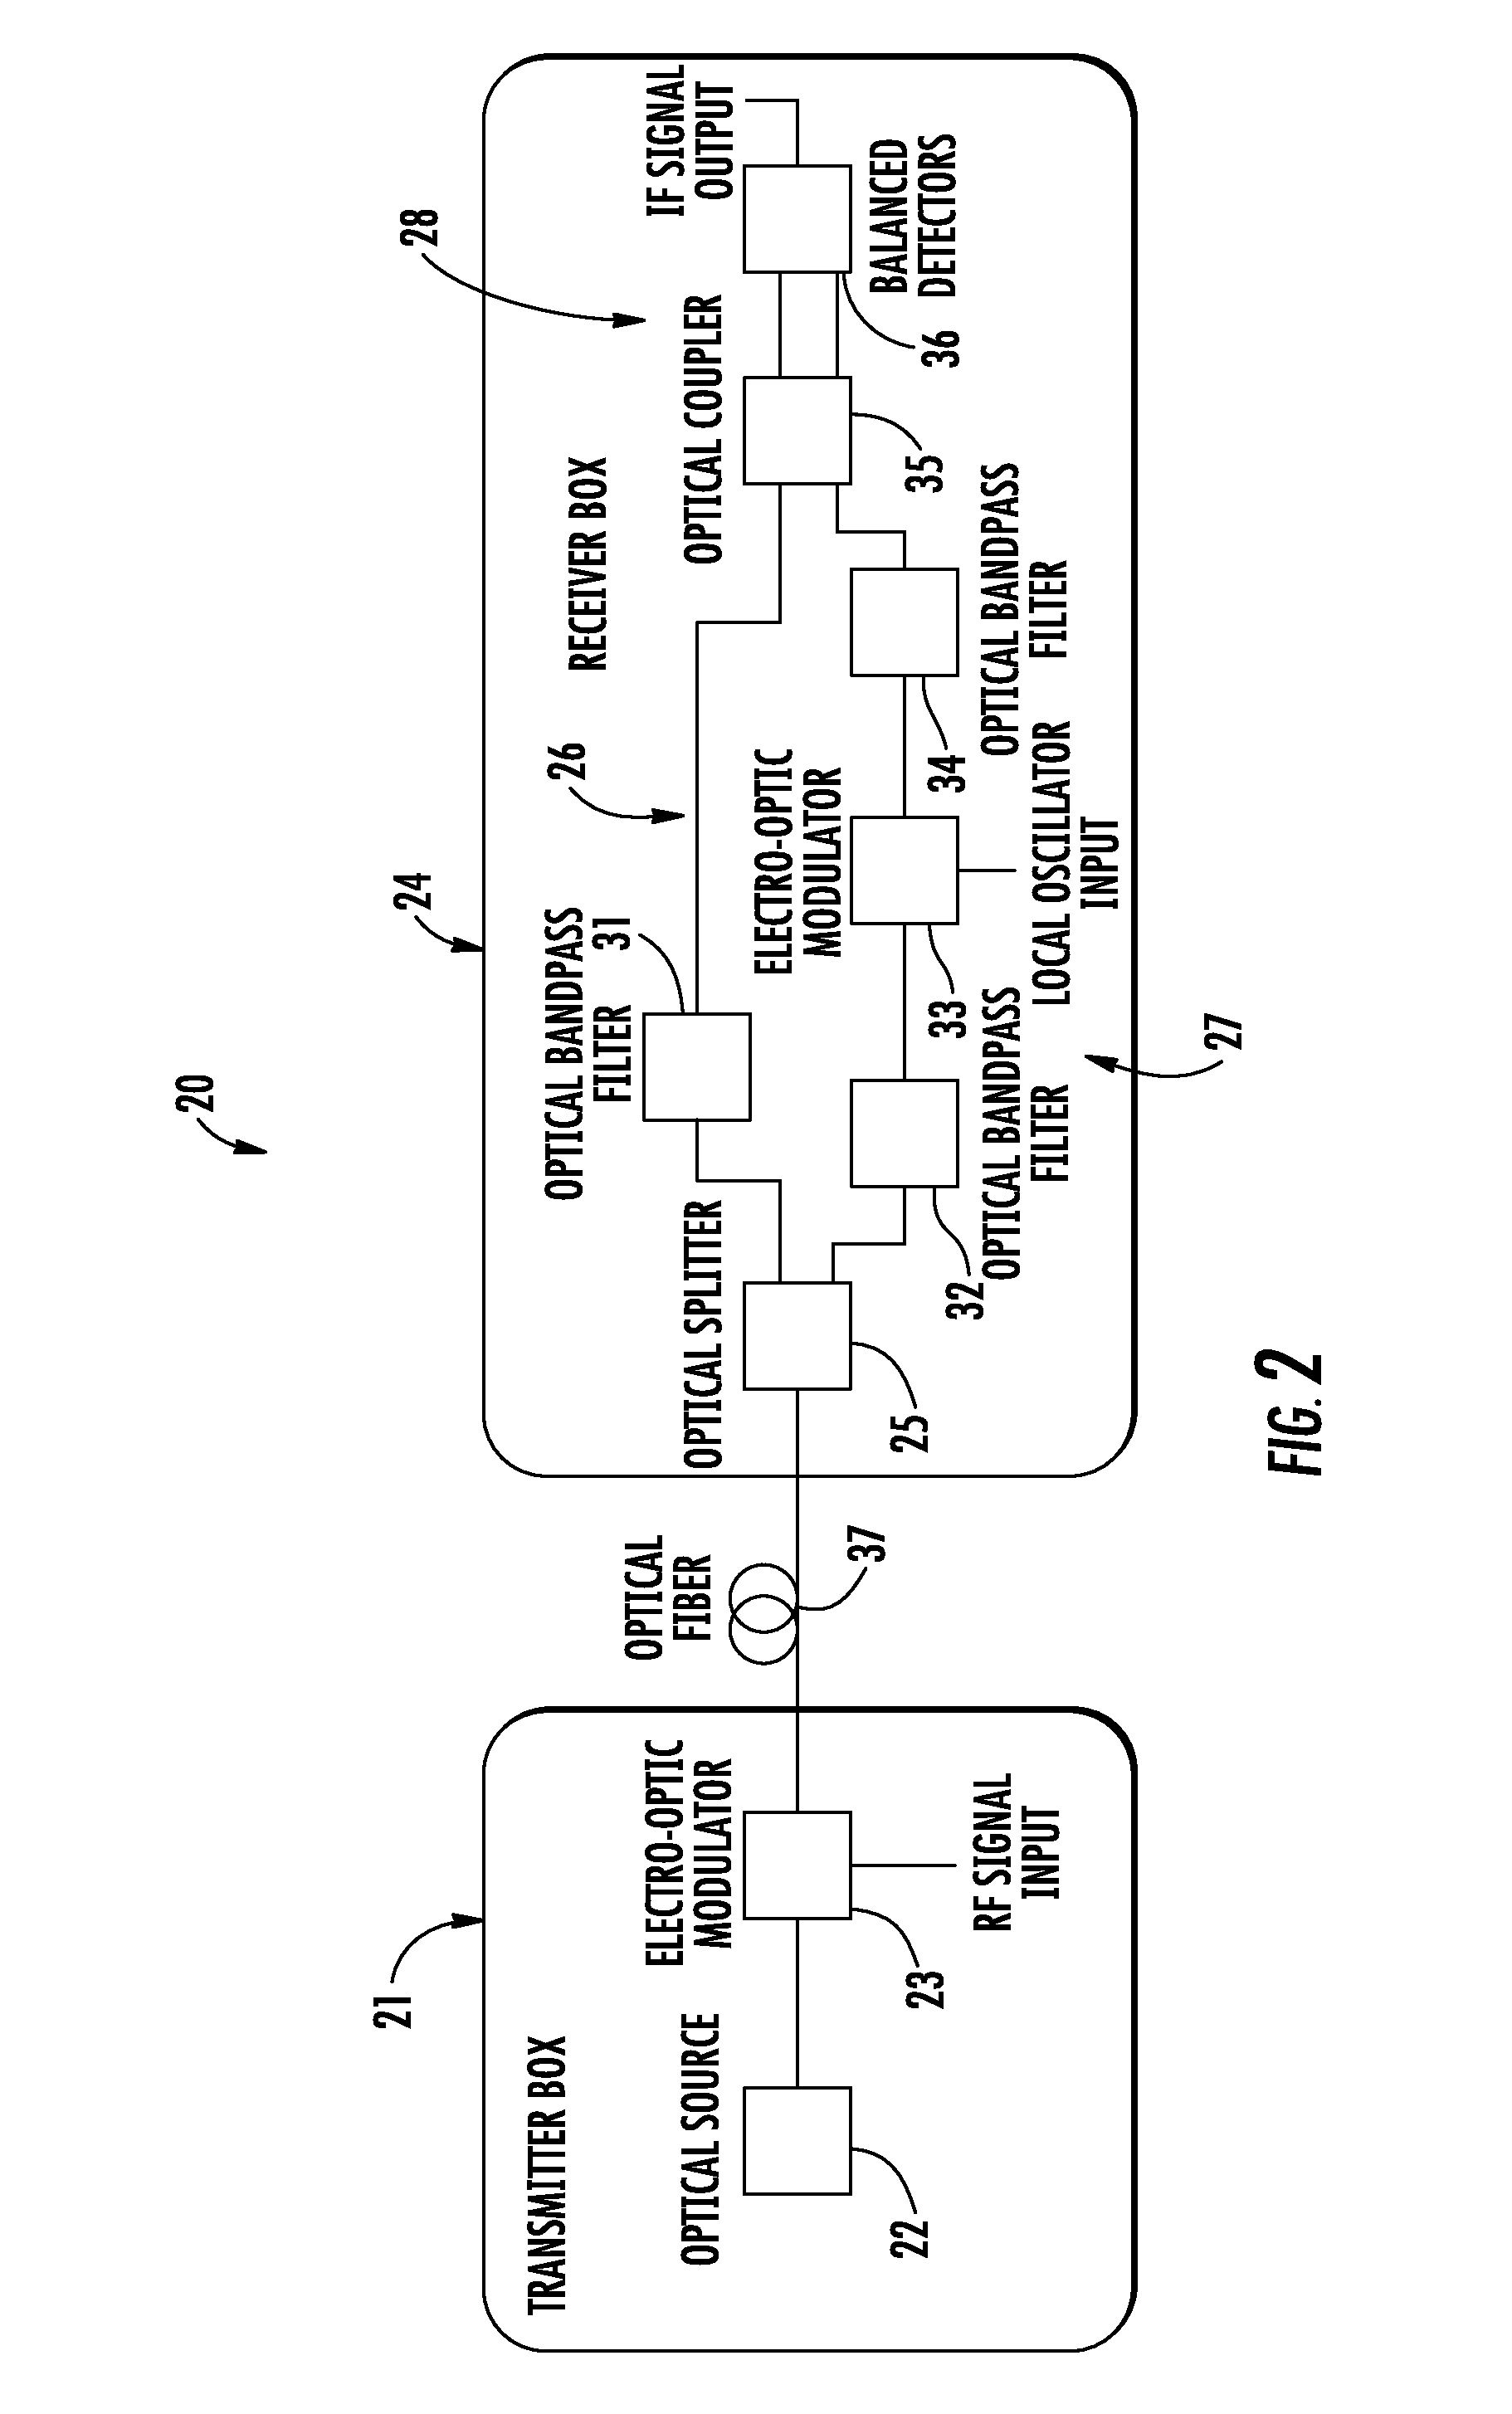 RF communications device including an optical link and related devices and methods